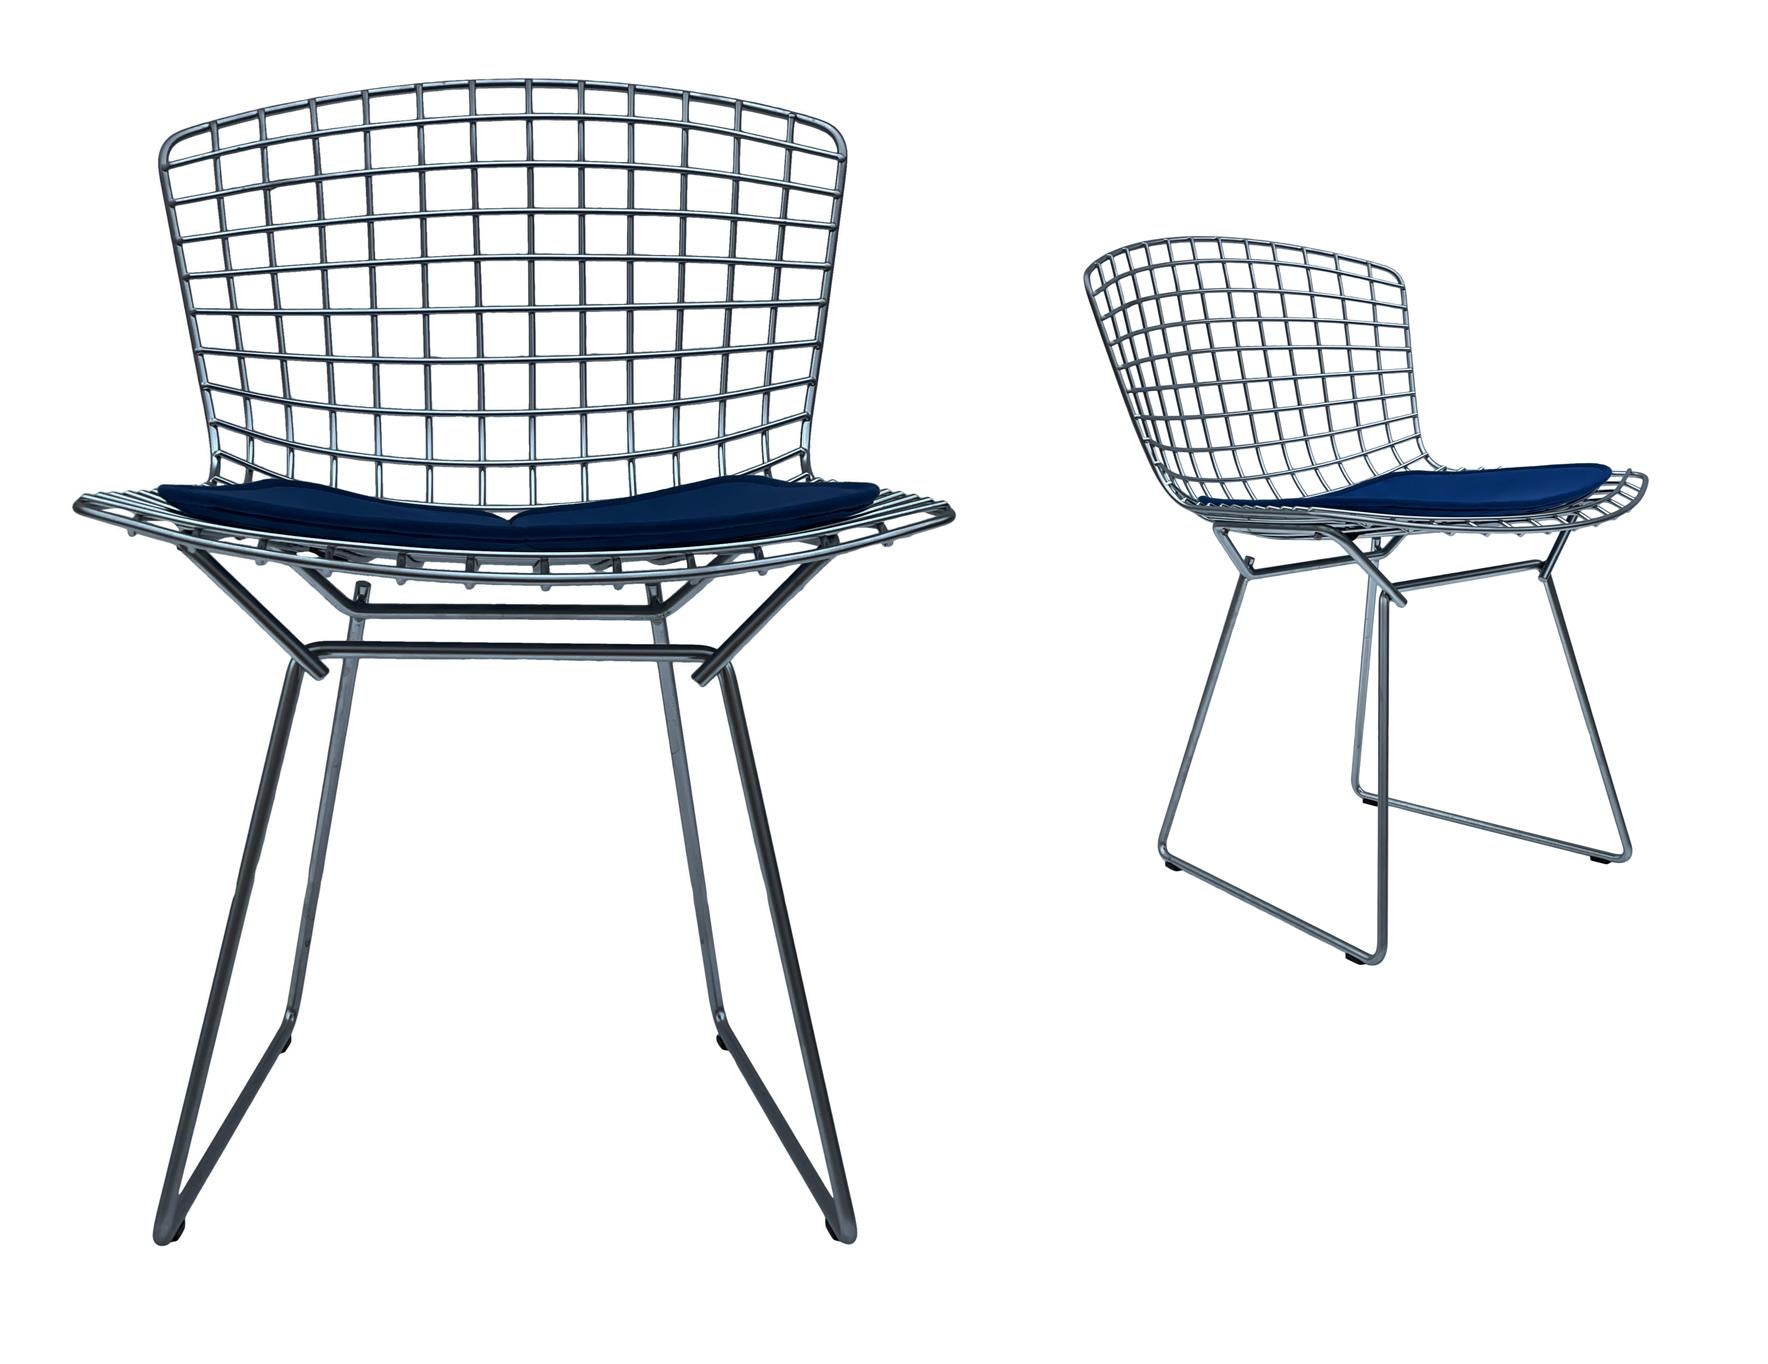 Pair of Mid-Century Modern Wire Side or Dining Chairs by Harry Bertoia for Knoll 1